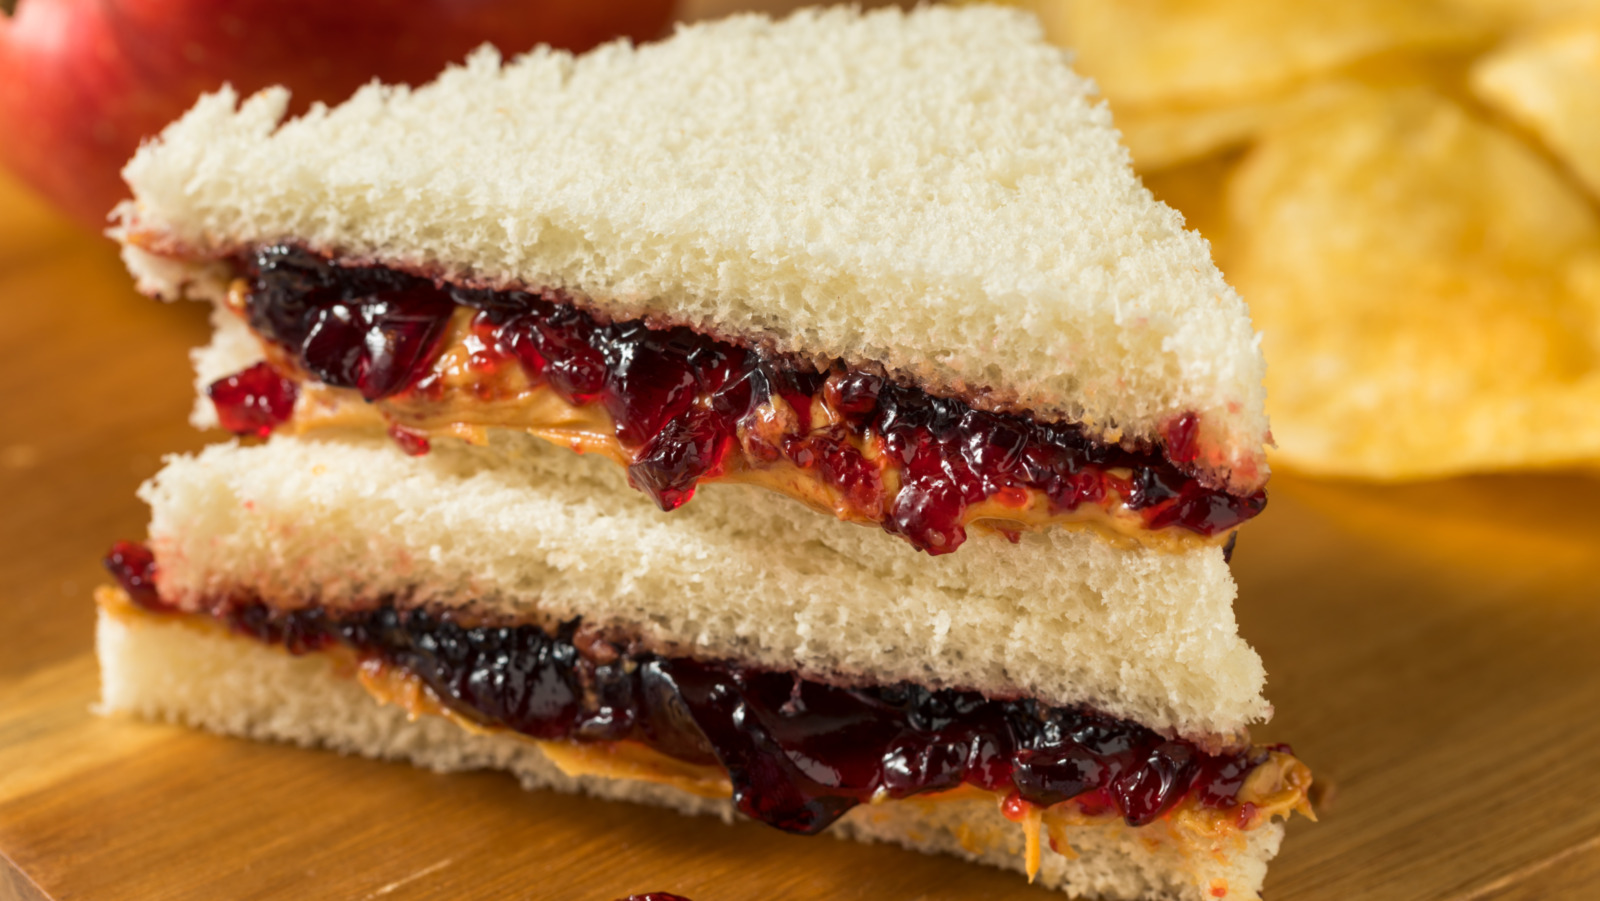 Insanely Delicious Things You Should Put On Your PB J